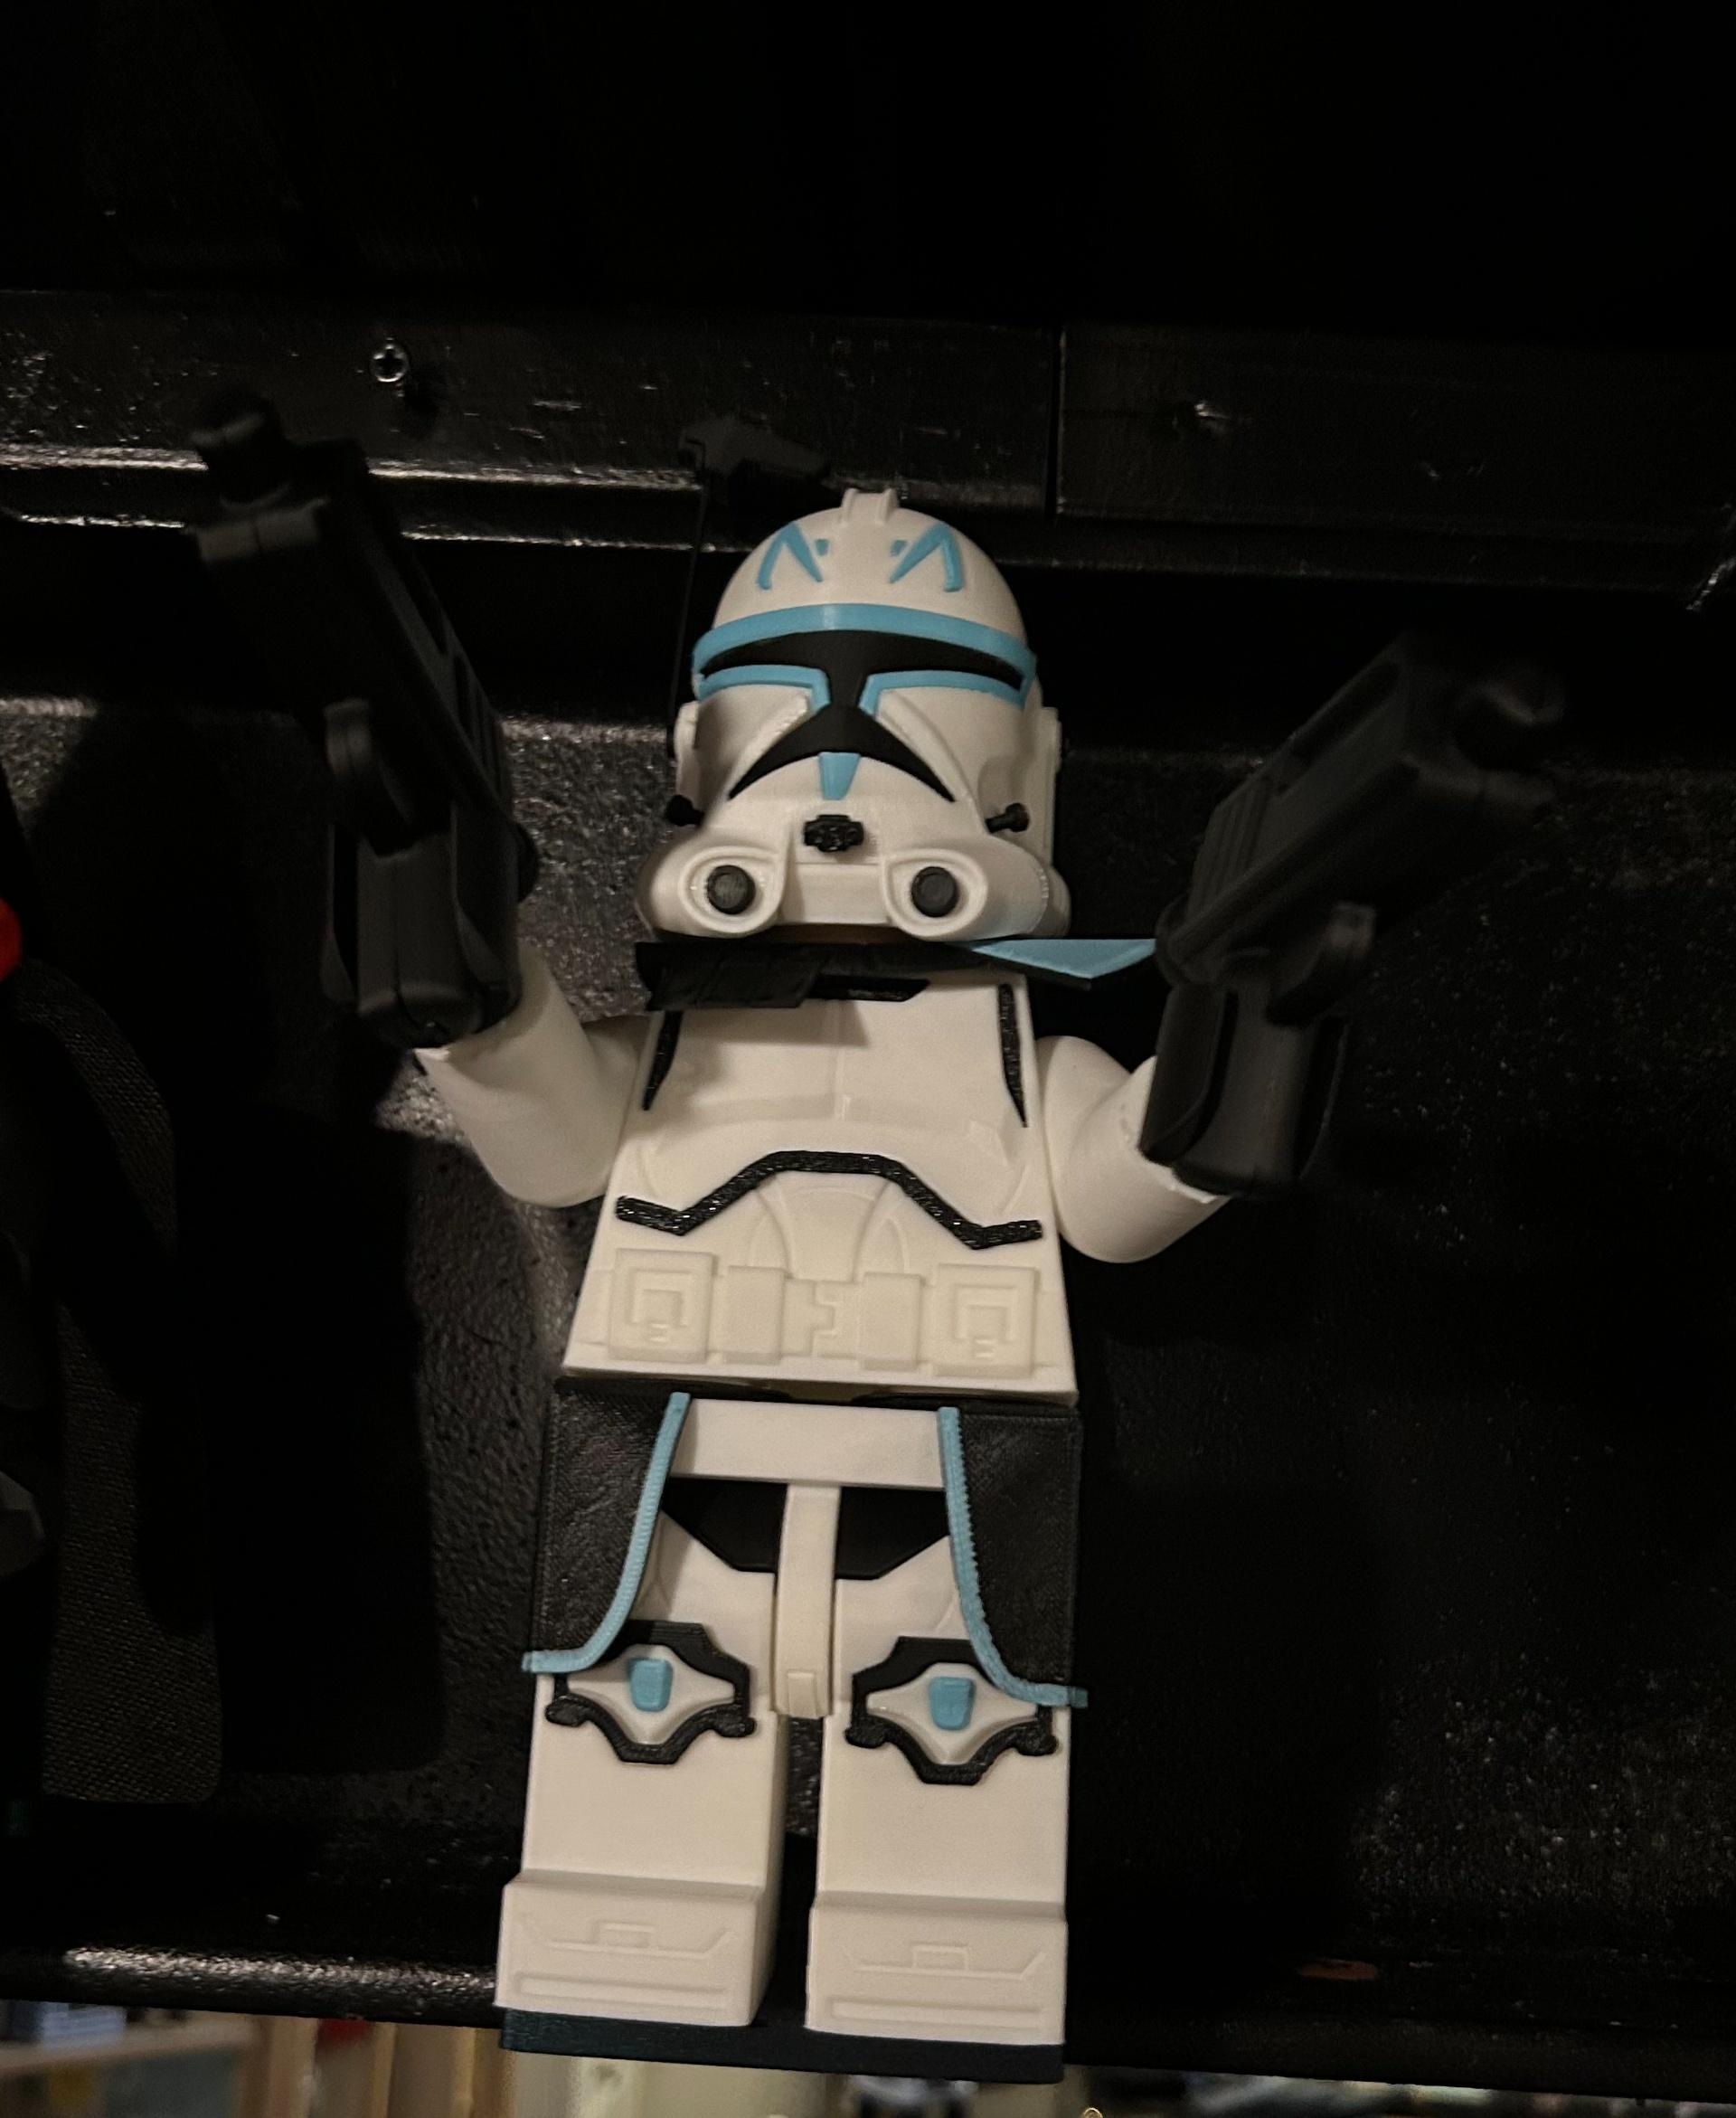 Captain Rex (6:1 LEGO-inspired brick figure, NO MMU/AMS, NO supports, NO glue) - Hanging out on the iBeam in the Man Cave - 3d model